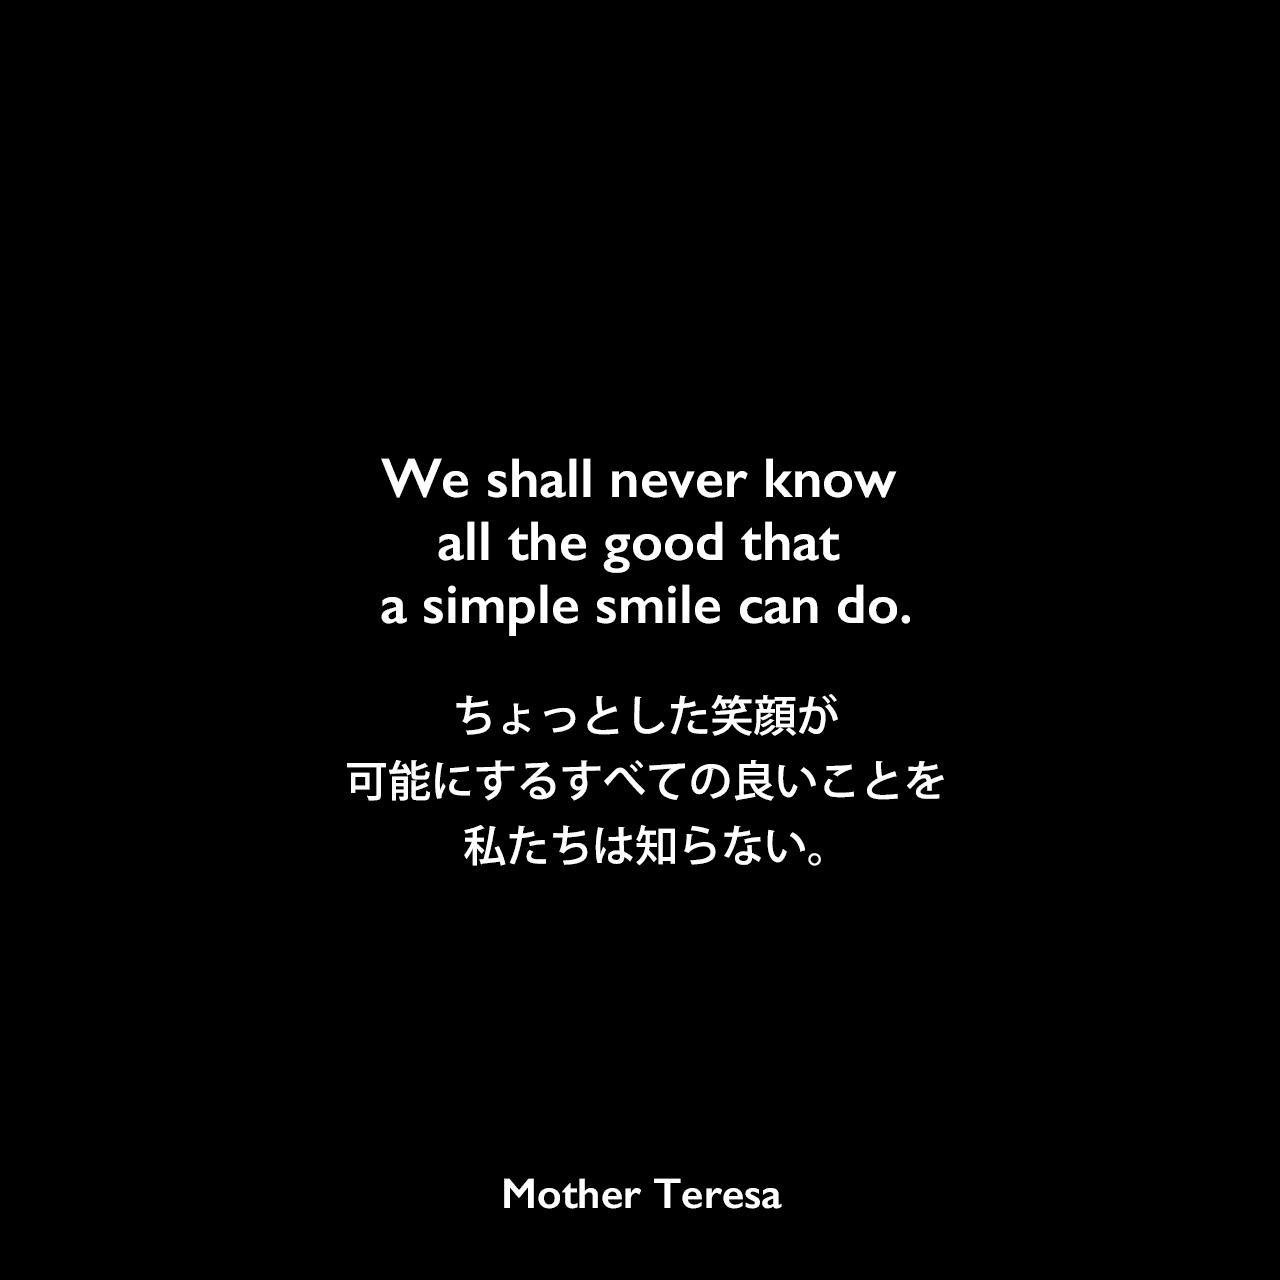 We shall never know all the good that a simple smile can do.ちょっとした笑顔が可能にするすべての良いことを私たちは知らない。Mother Teresa